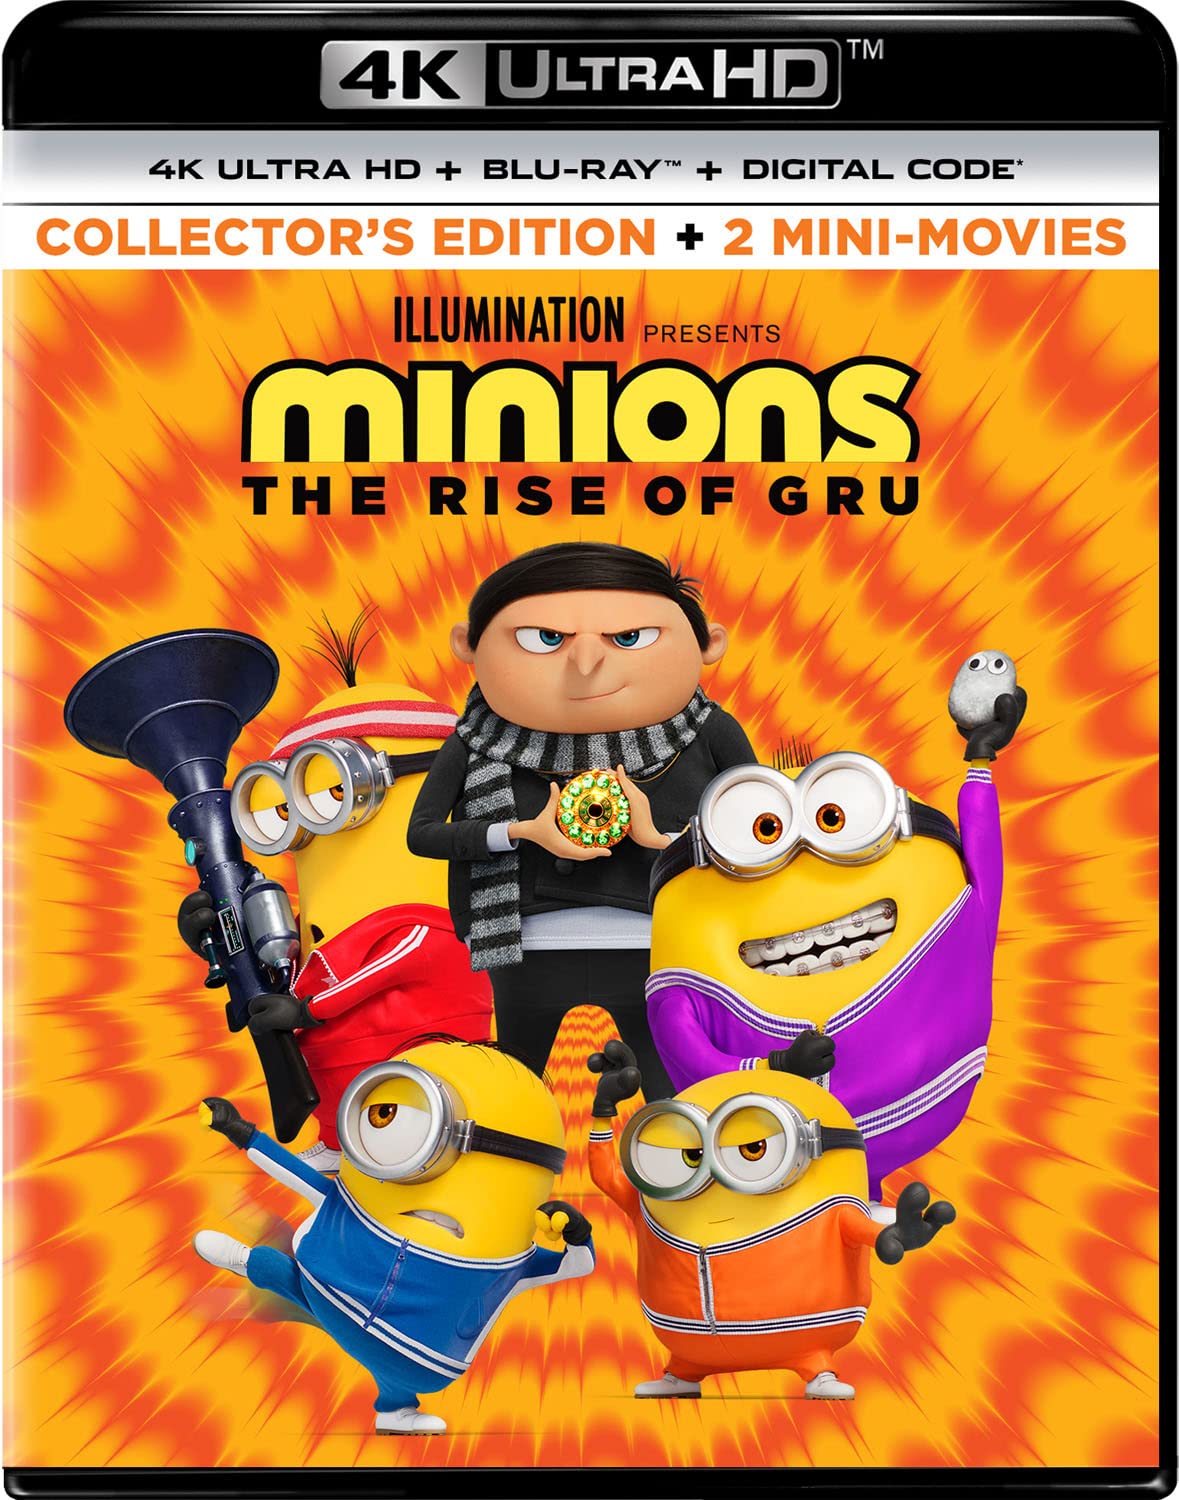 Minions- The Rise of Gru 4k Blu-ray Collectors Edition